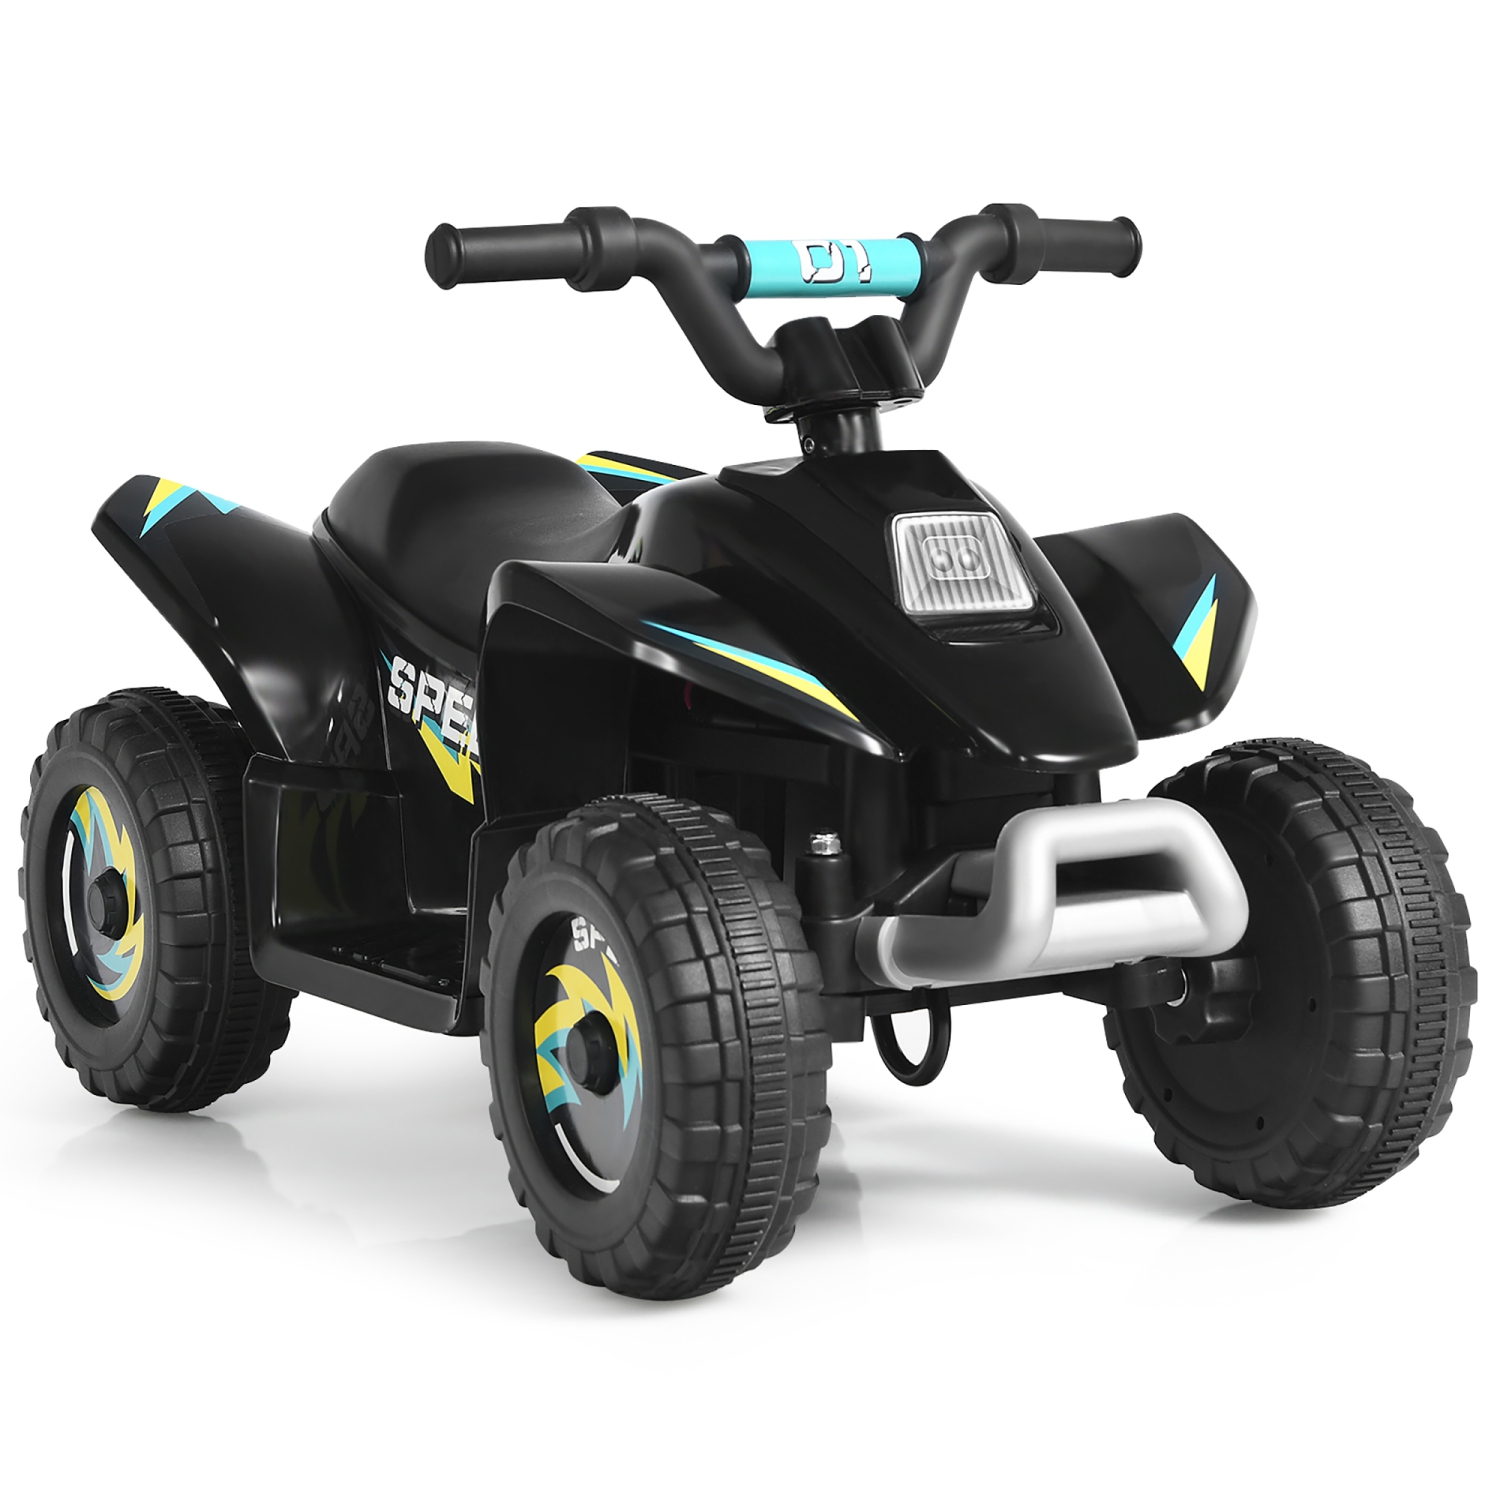 Costway 6V Kids Electric Quad ATV 4 Wheels Ride On Toy Toddlers Forward&Reverse